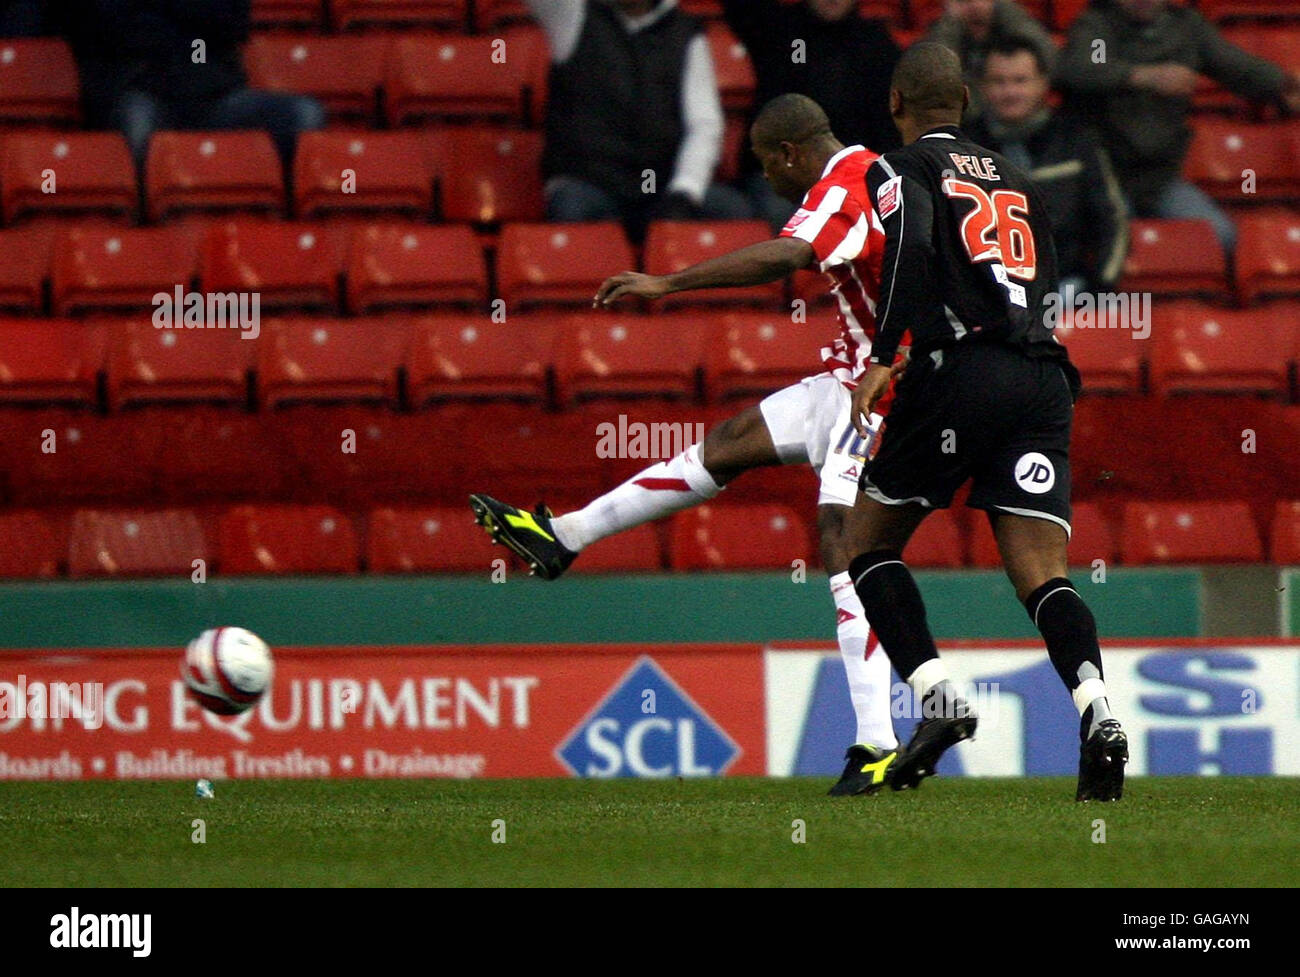 Stoke City's Ricardo Fuller scores the first goal during the Coca-Cola Football League Championship match at the Britannia Stadium, Stoke-on-Trent. Stock Photo